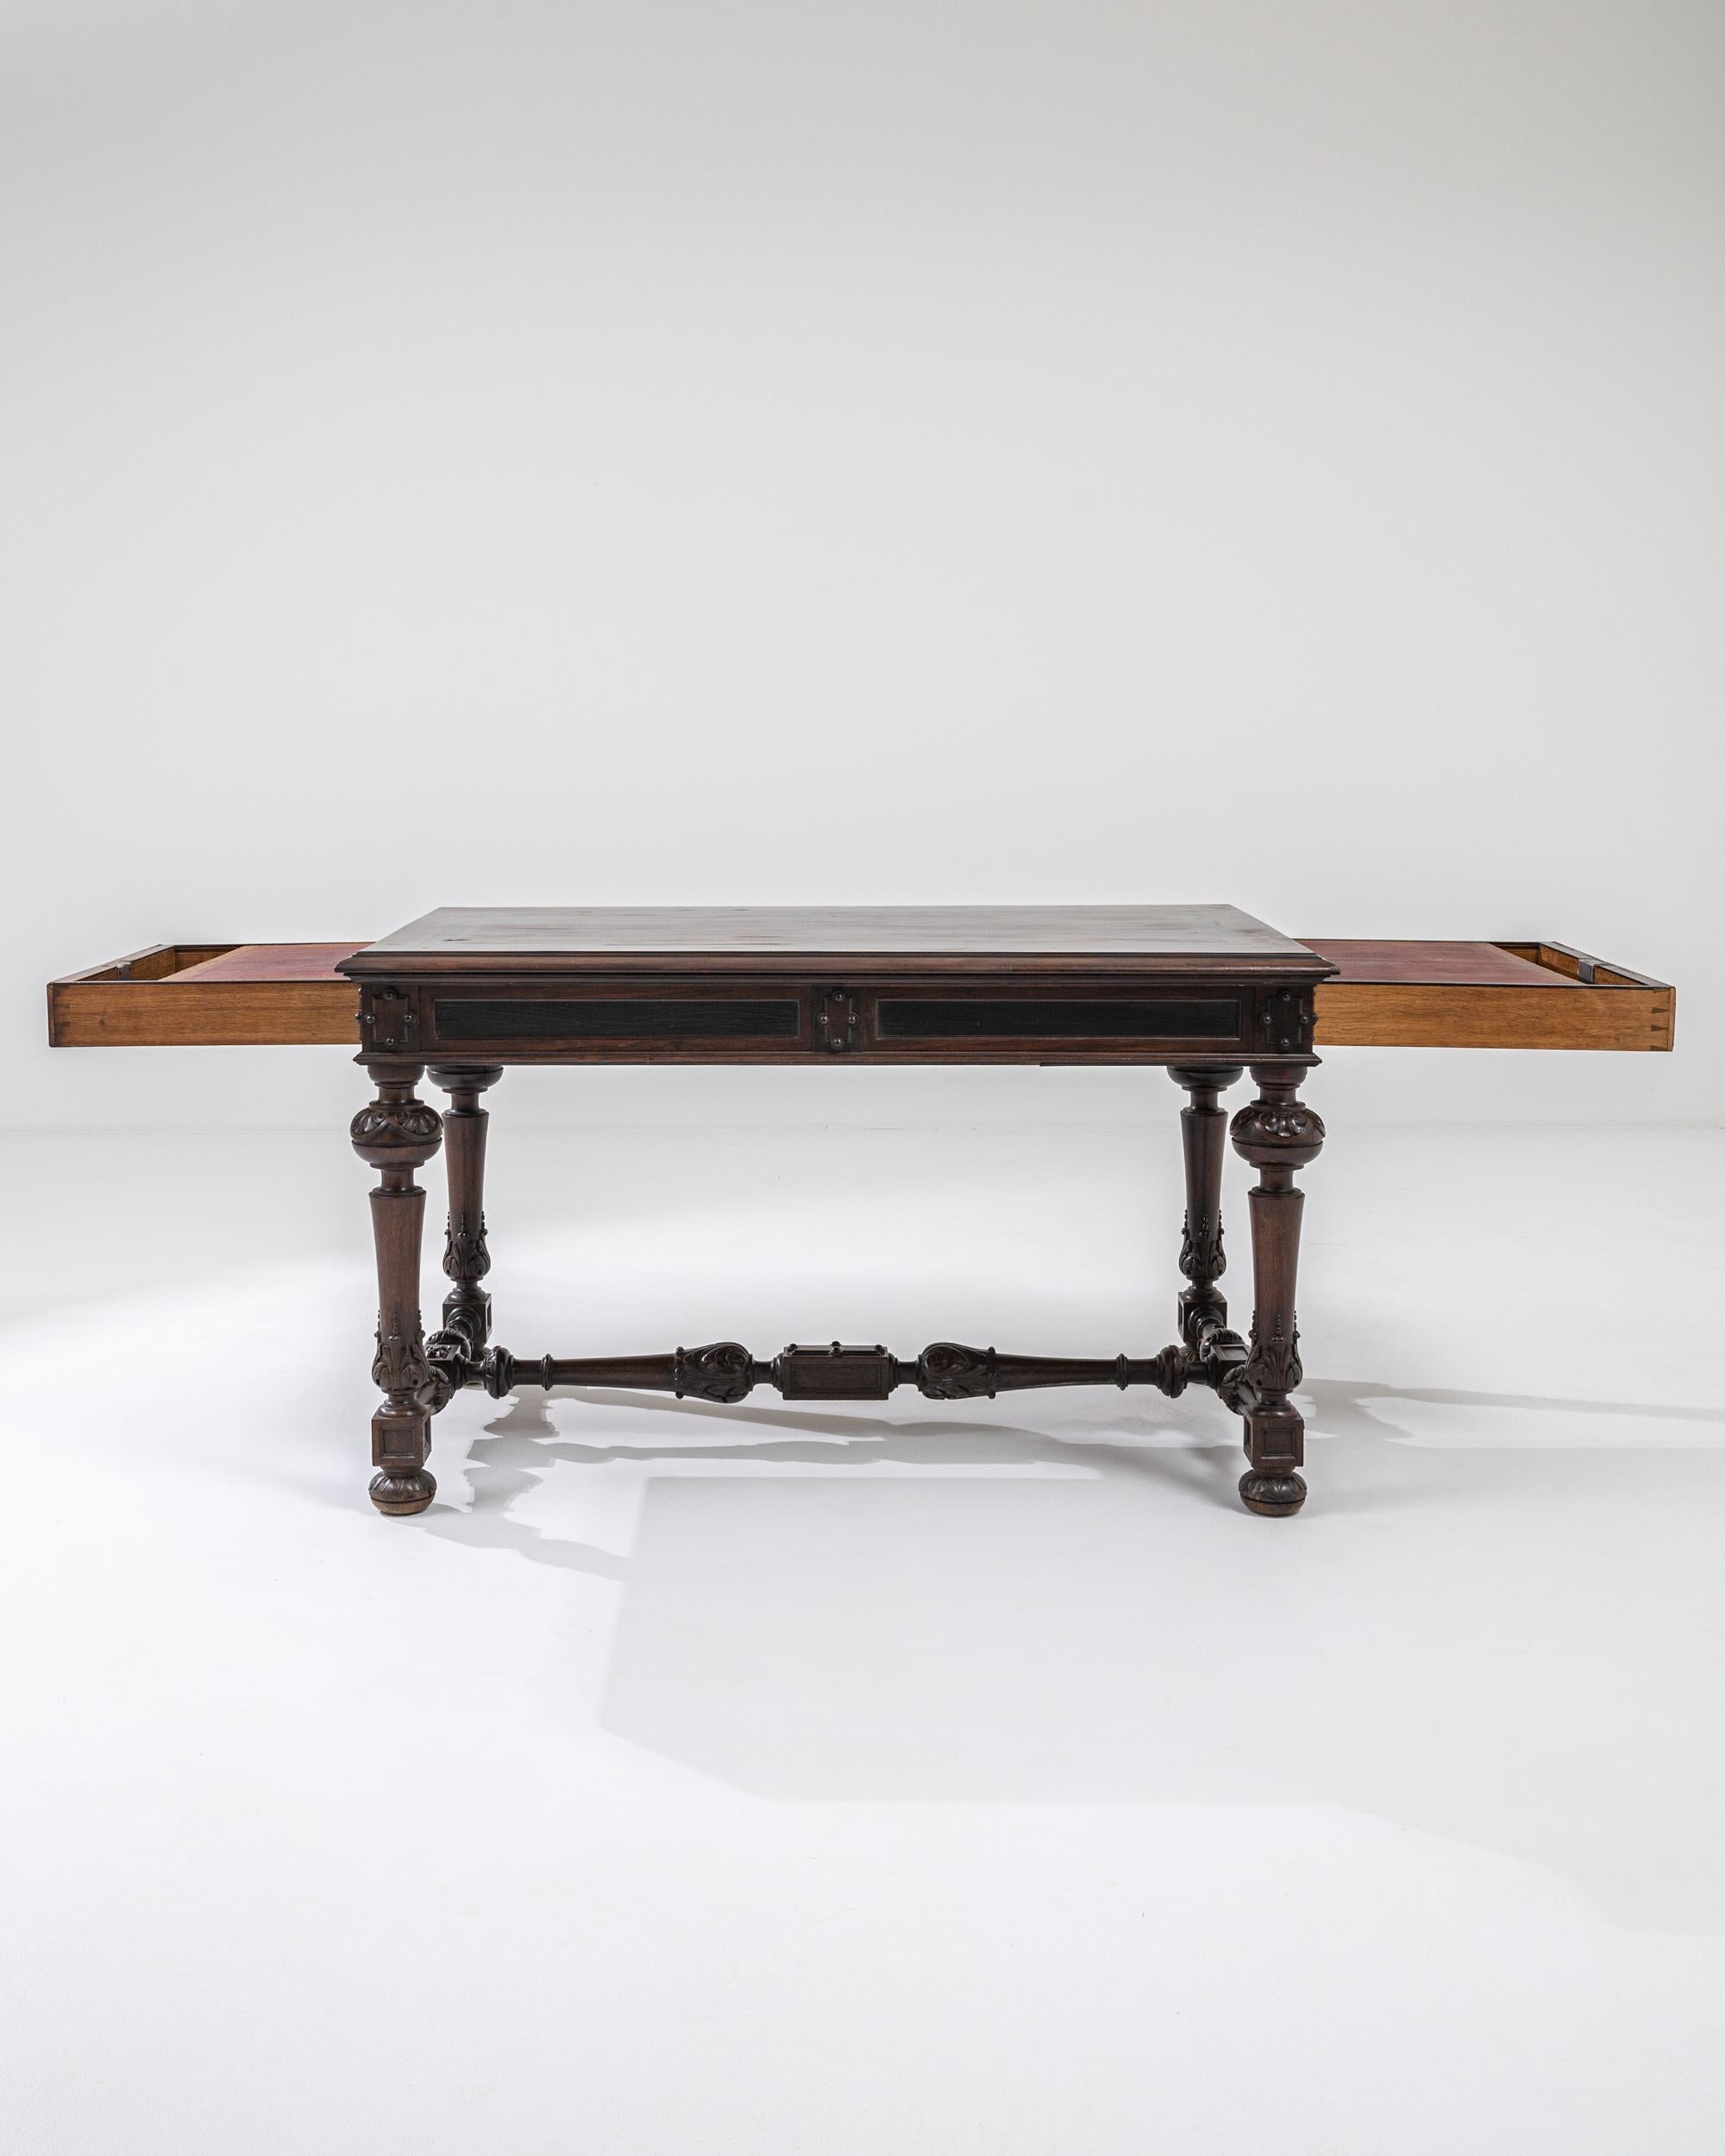 French Provincial 19th Century French Wooden Table